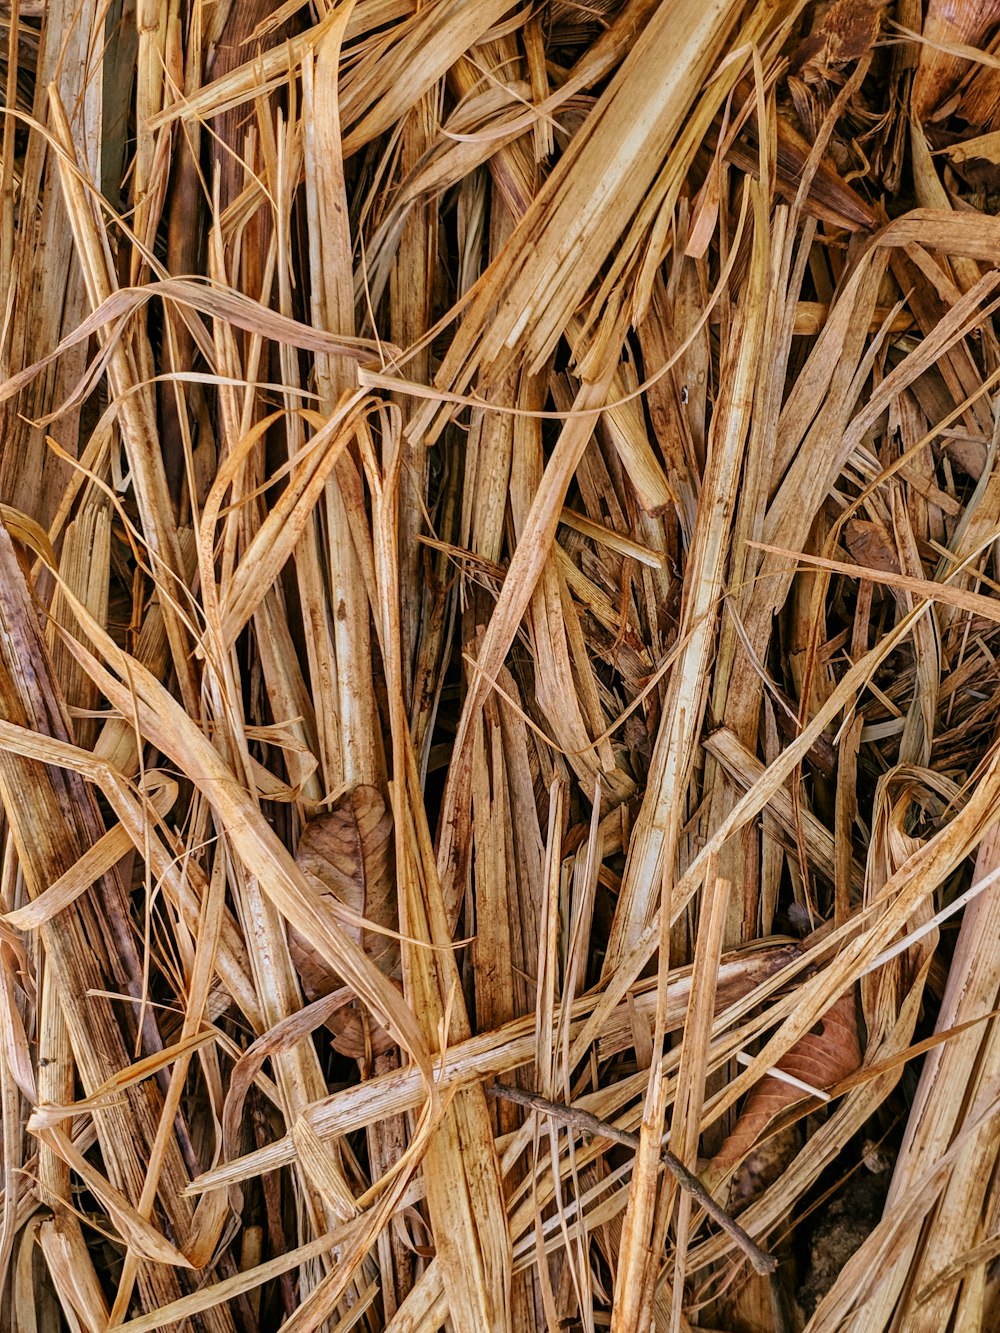 a close-up of some straw